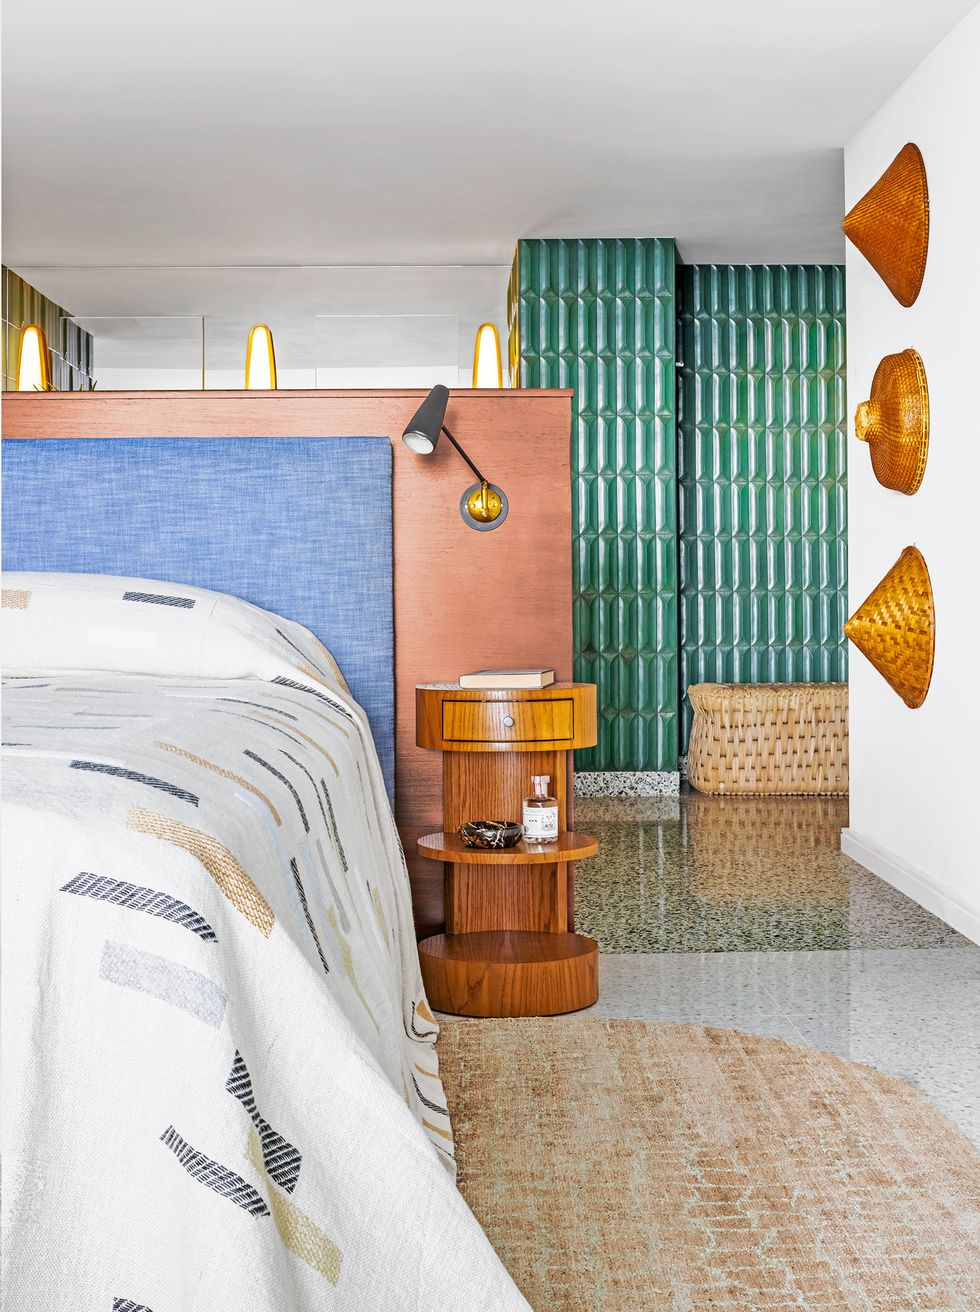 bedroom with white cover with muted color stripes next to the bed is a round three tier night stand in wood and beyond are seen the green vertical tiles from the back of the bathroom wall